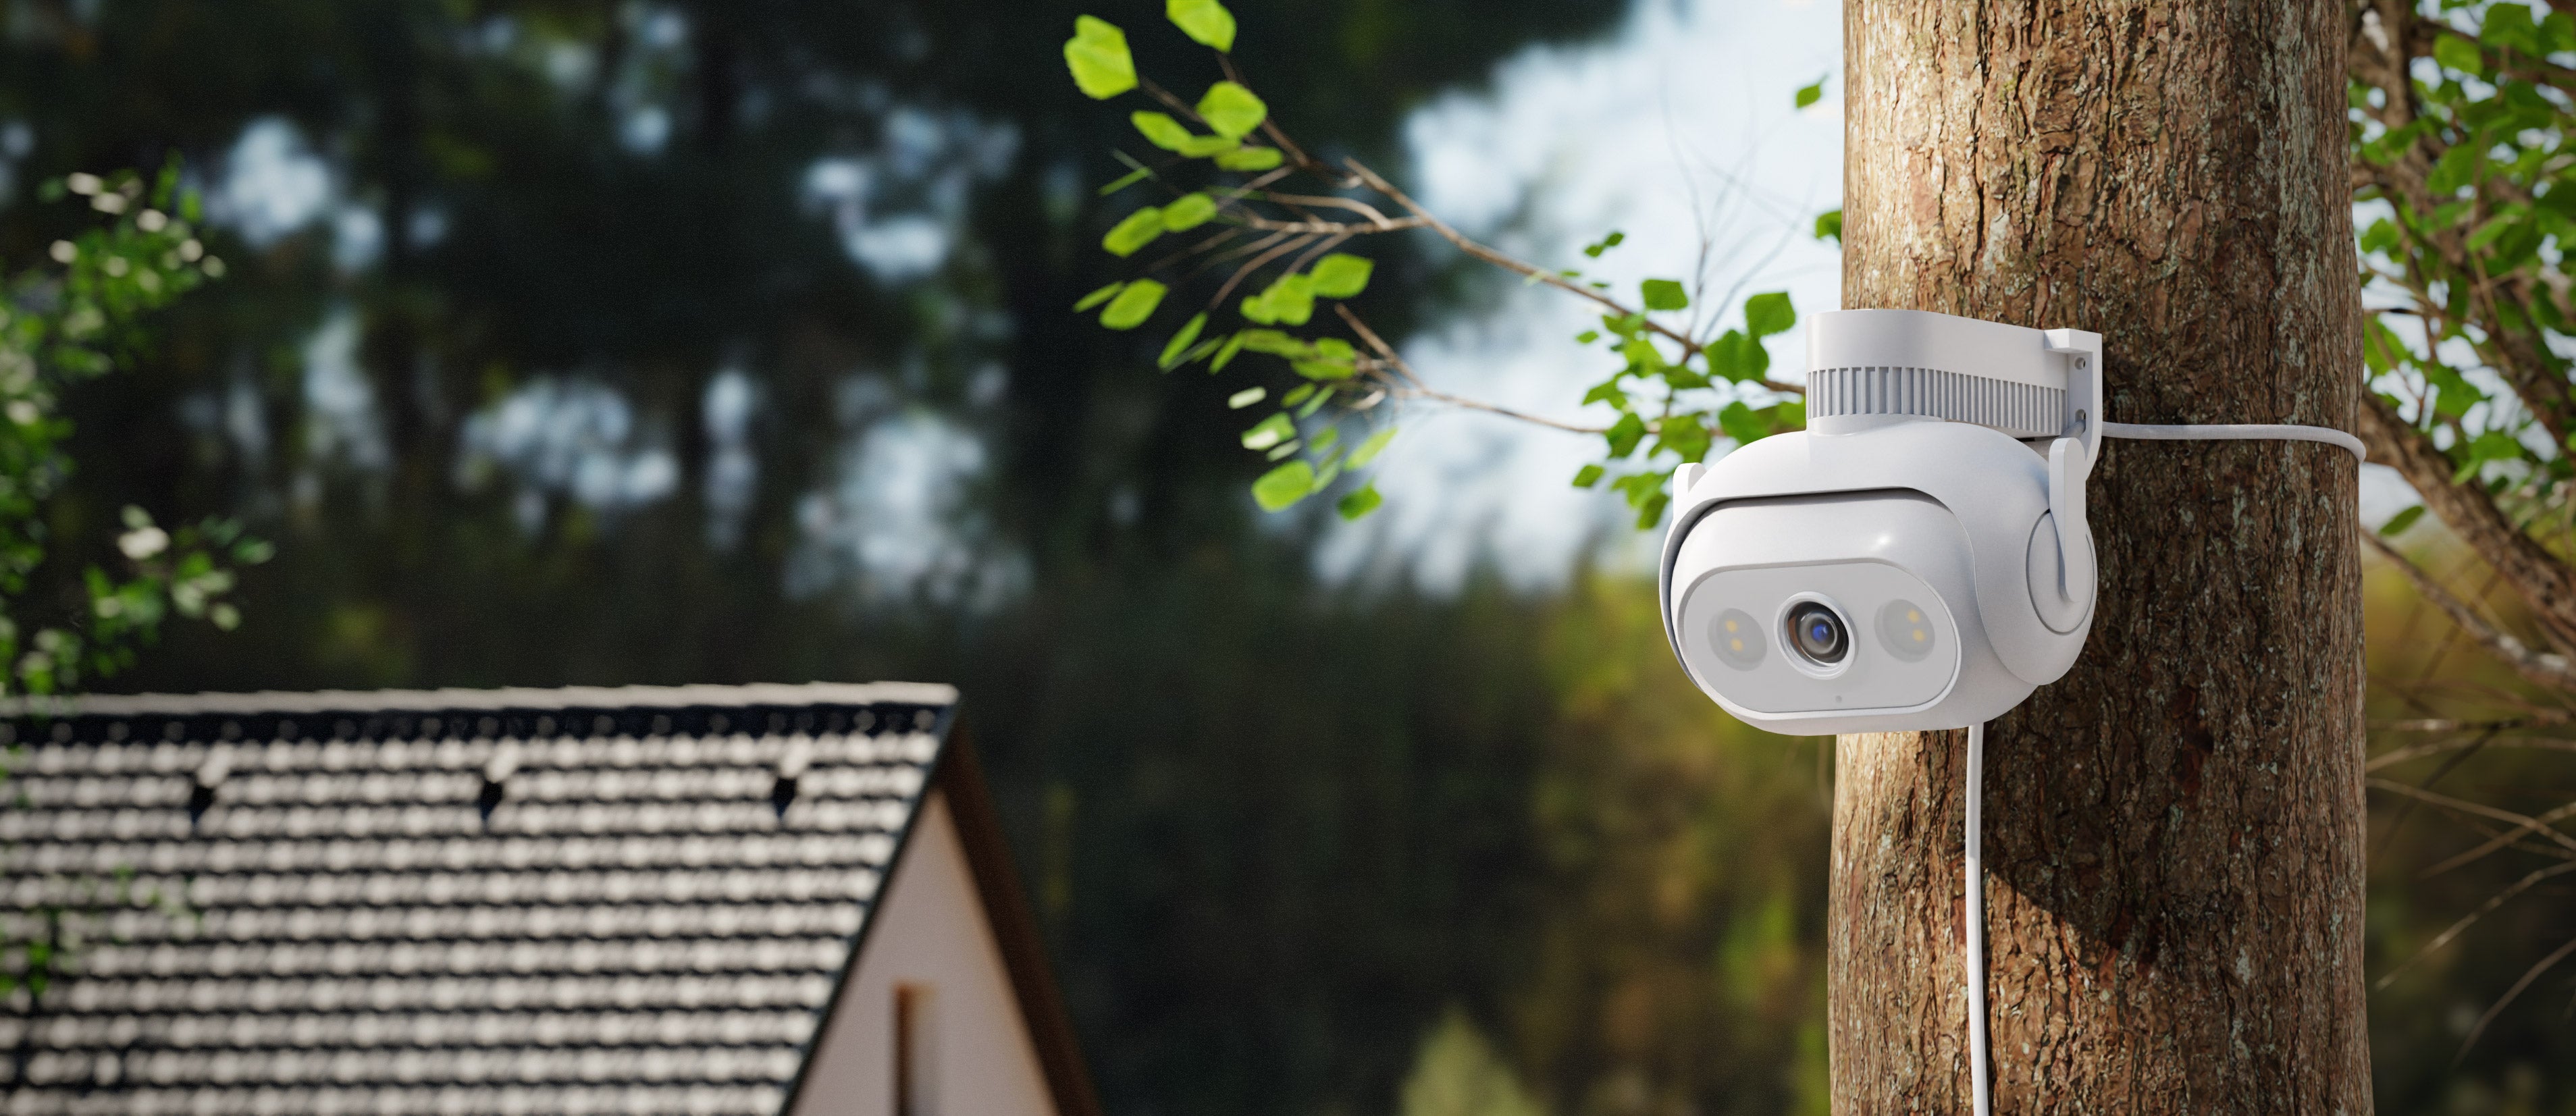 Imilab-ec5-surveilance-white-security-camera-fixed-on-tree-bark-with-bracket-house-and-trees-on-background-sunny-day